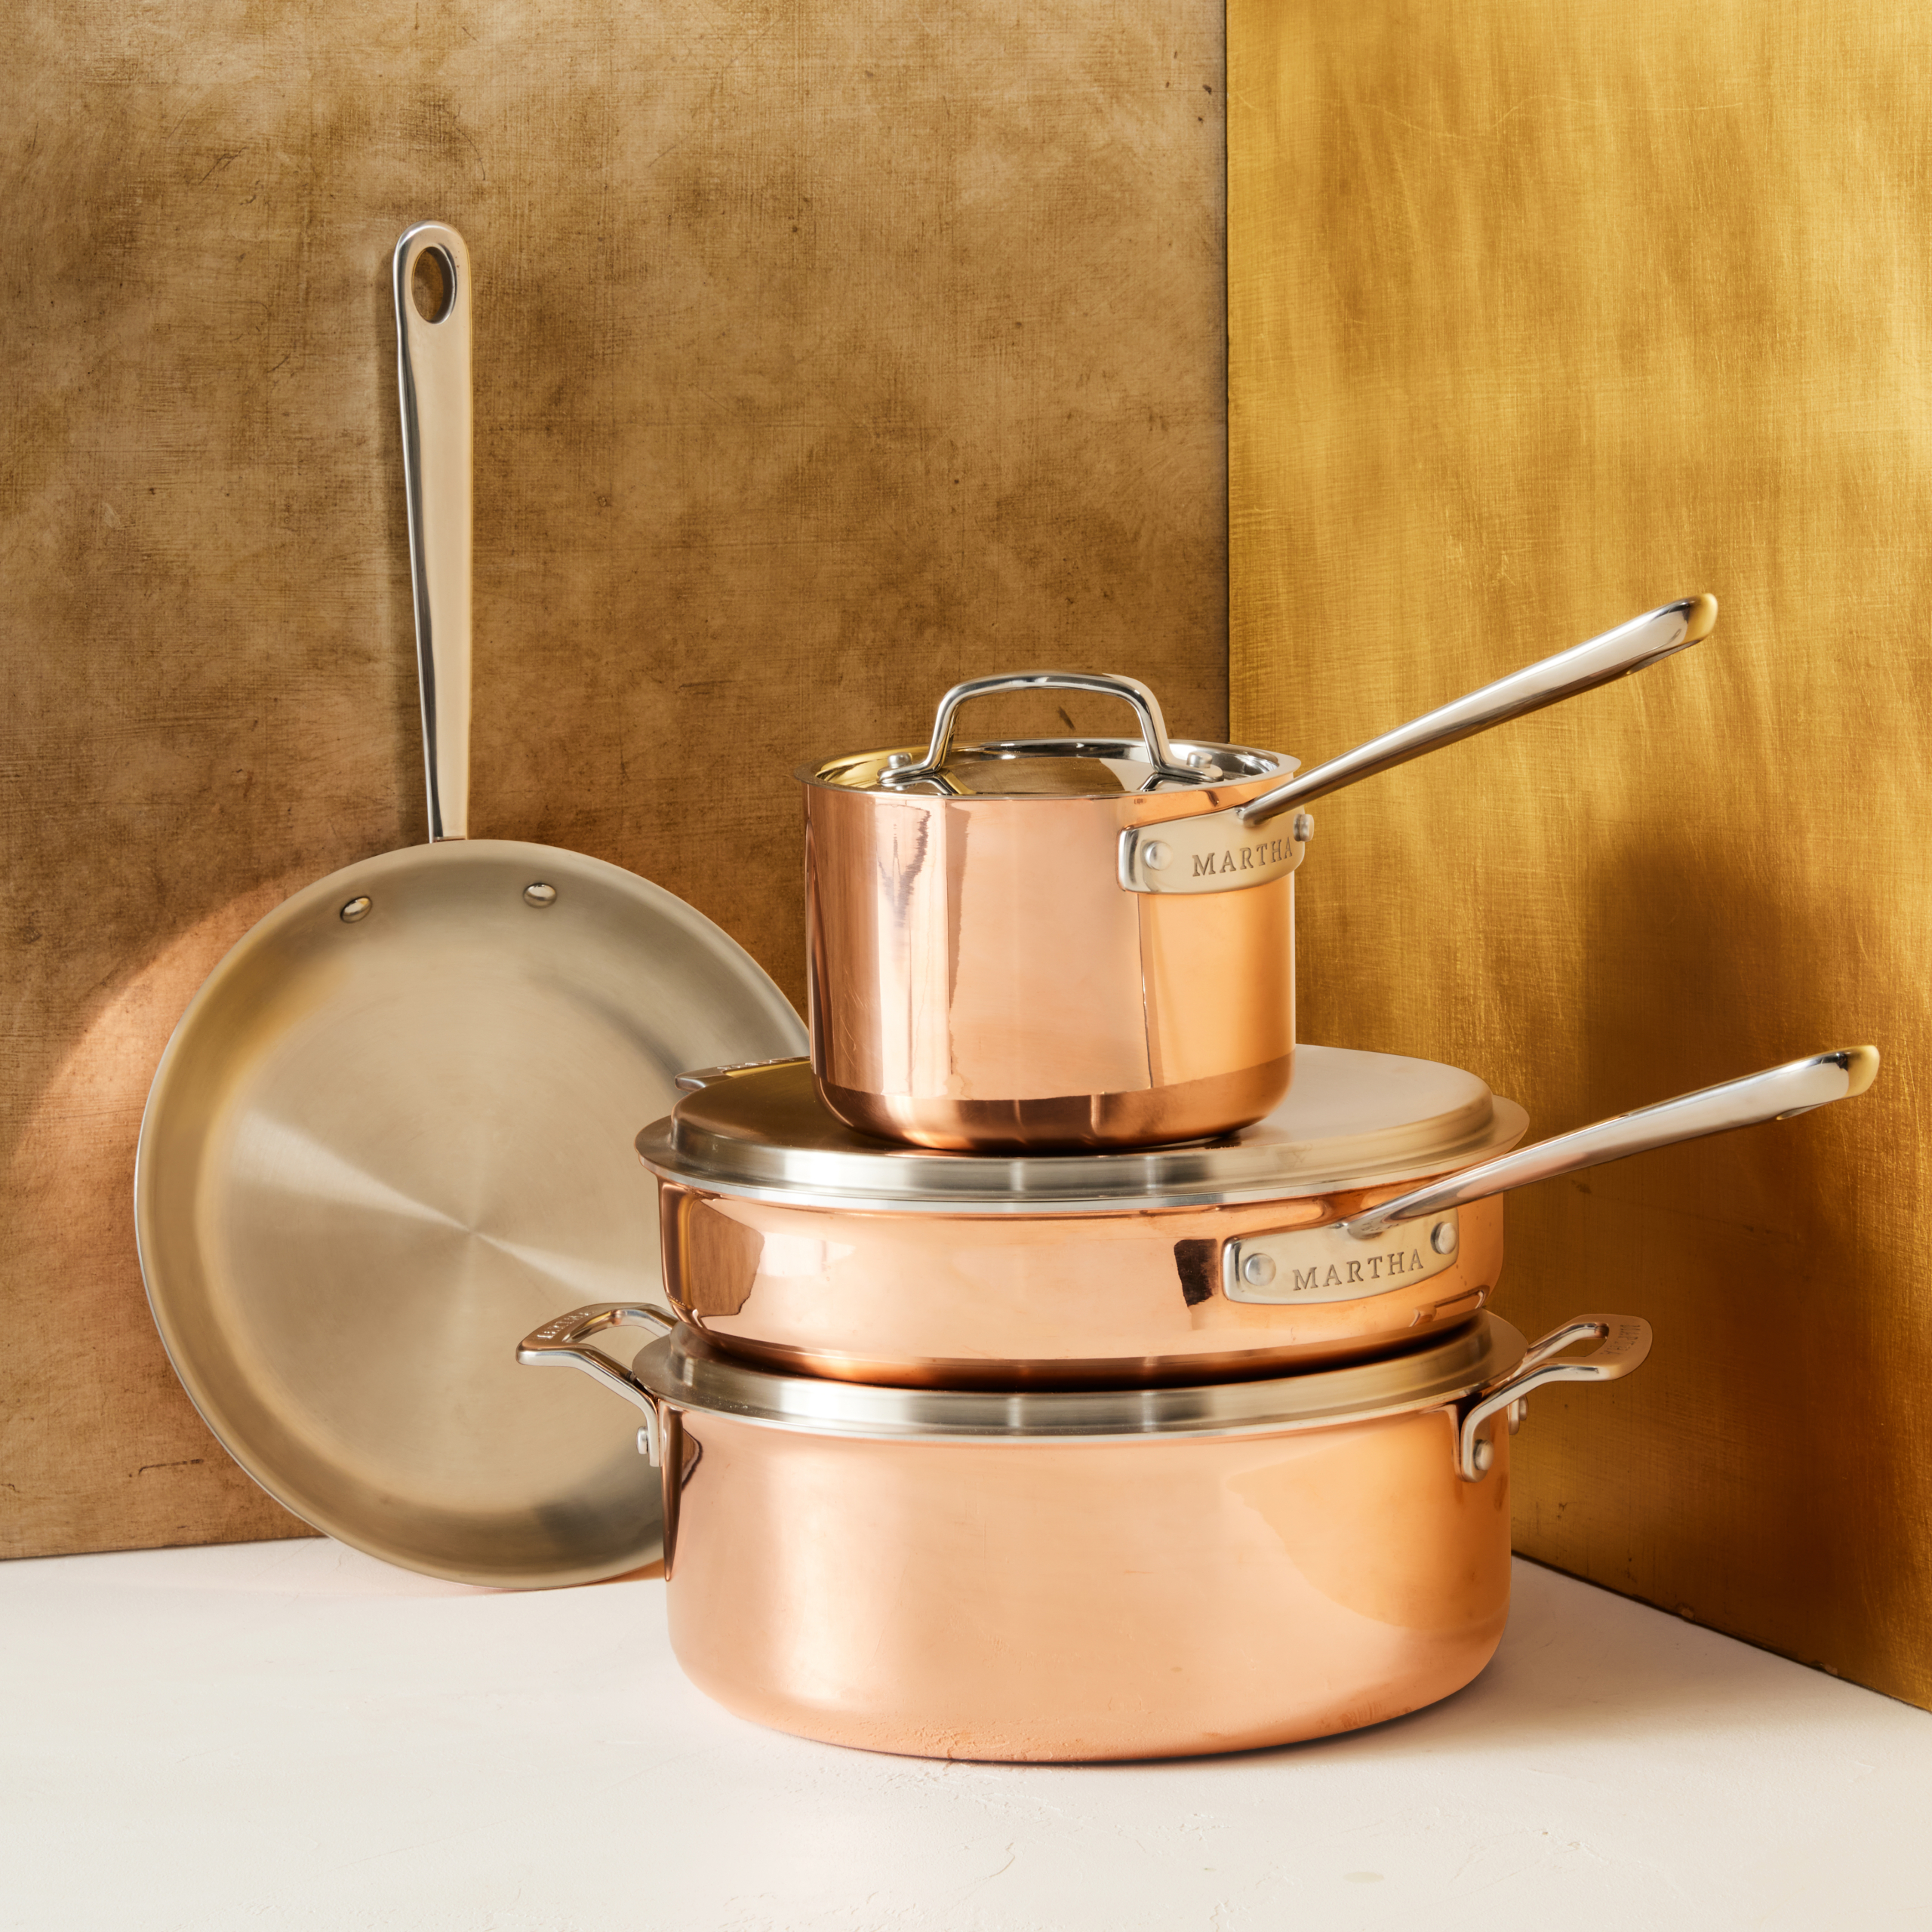 Martha Stewart - Investing in new cookware? Try COPPER. Here's why: http:// martha.ms/6188BLjc8